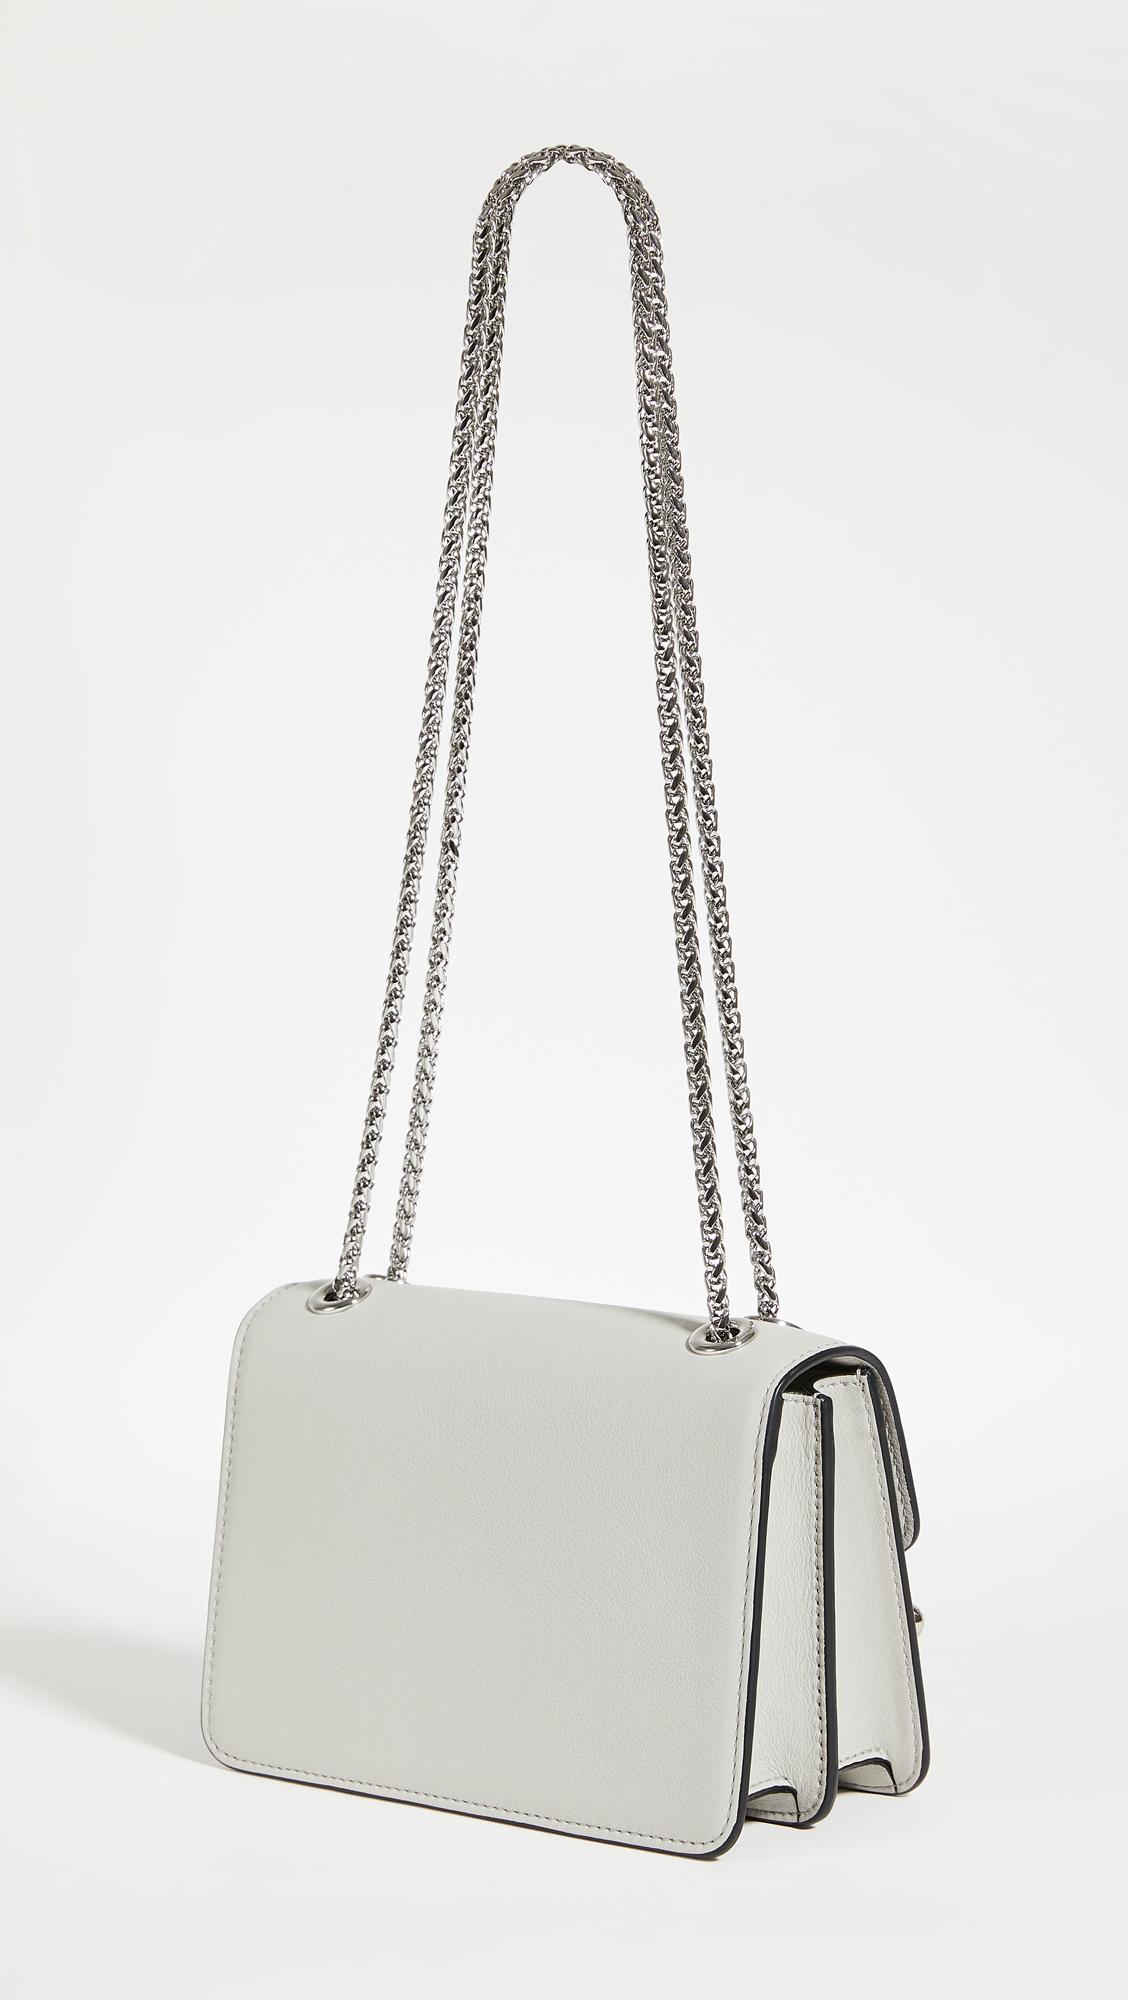 Strathberry Grey Leather East/west Leather Crossbody Bag Strathberry